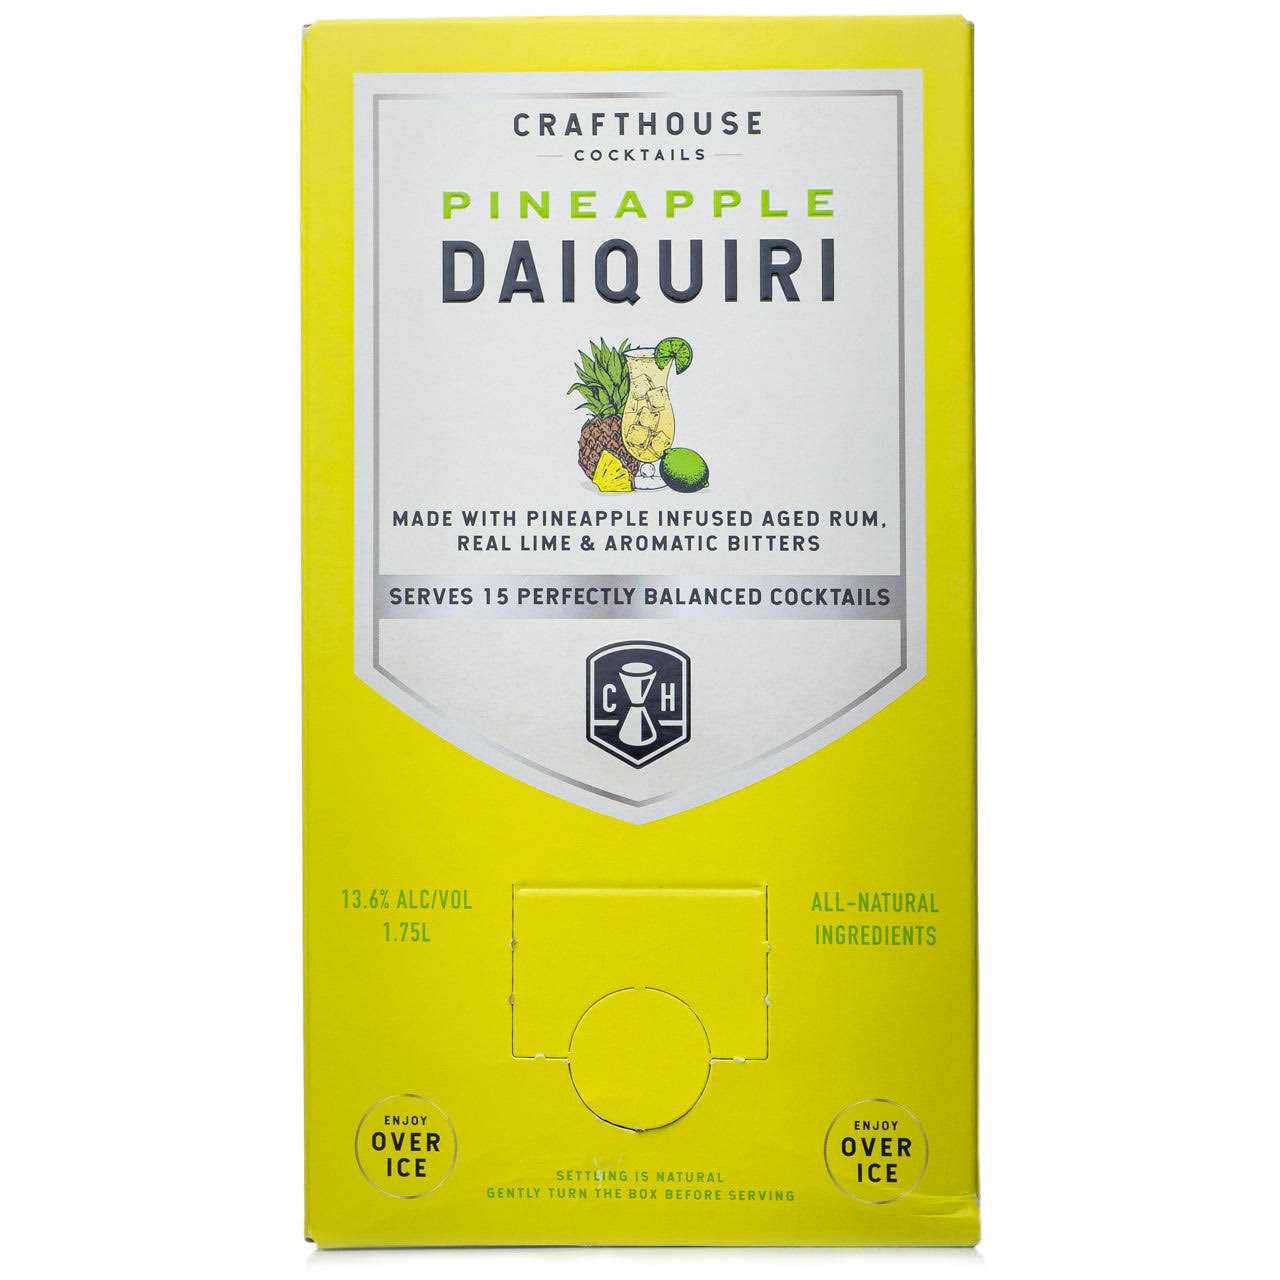 Crafthouse Cocktails Pineapple Daiquiri (1.75L)